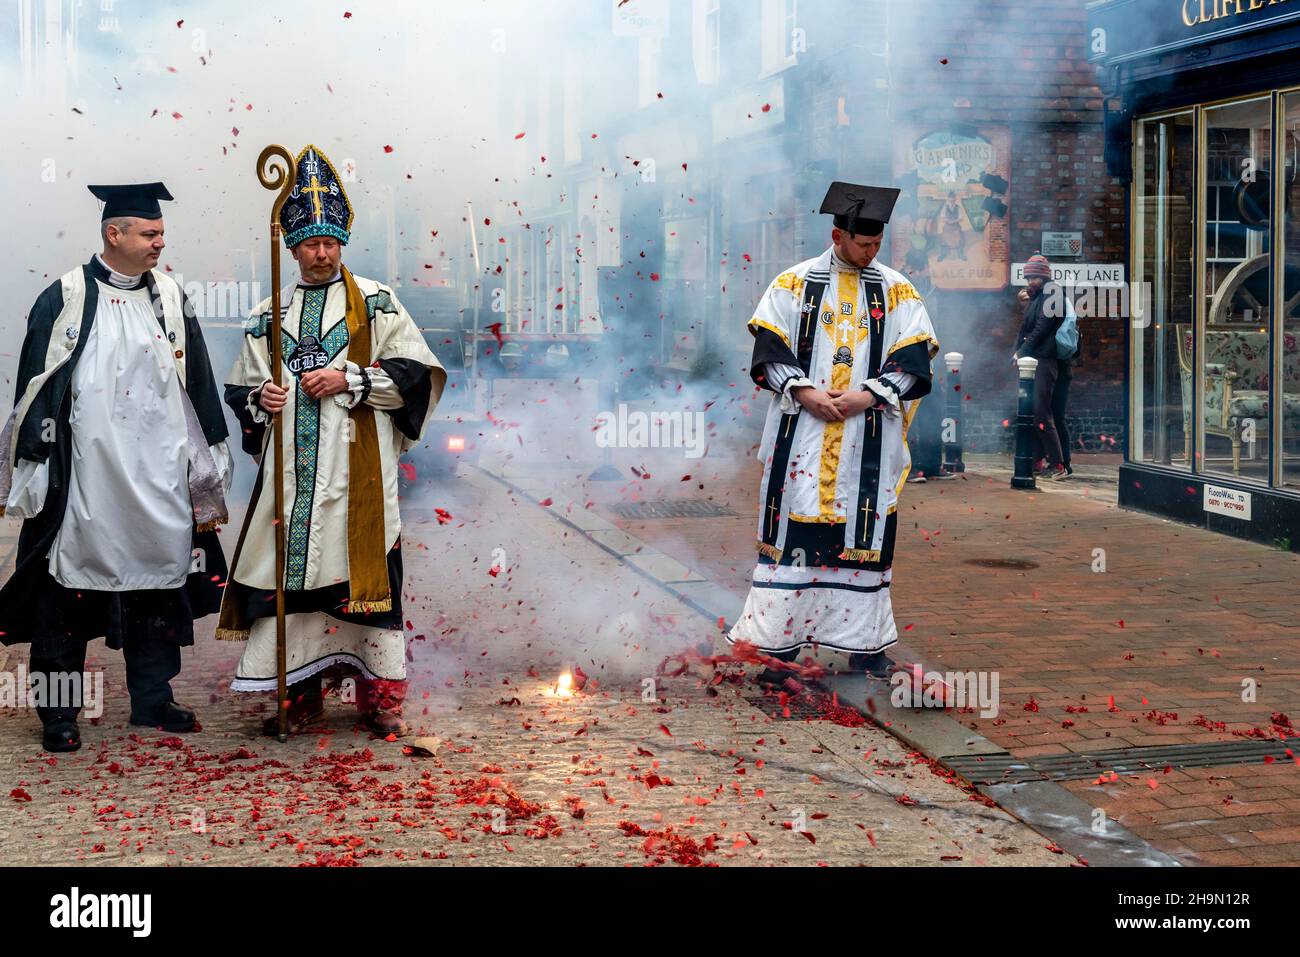 Cliffe Bonfire Society Members Dressed In Religious Costume Set Off Firecrackers In The Street Before The Annual Bonfire Night Celebrations, Lewes, UK Stock Photo